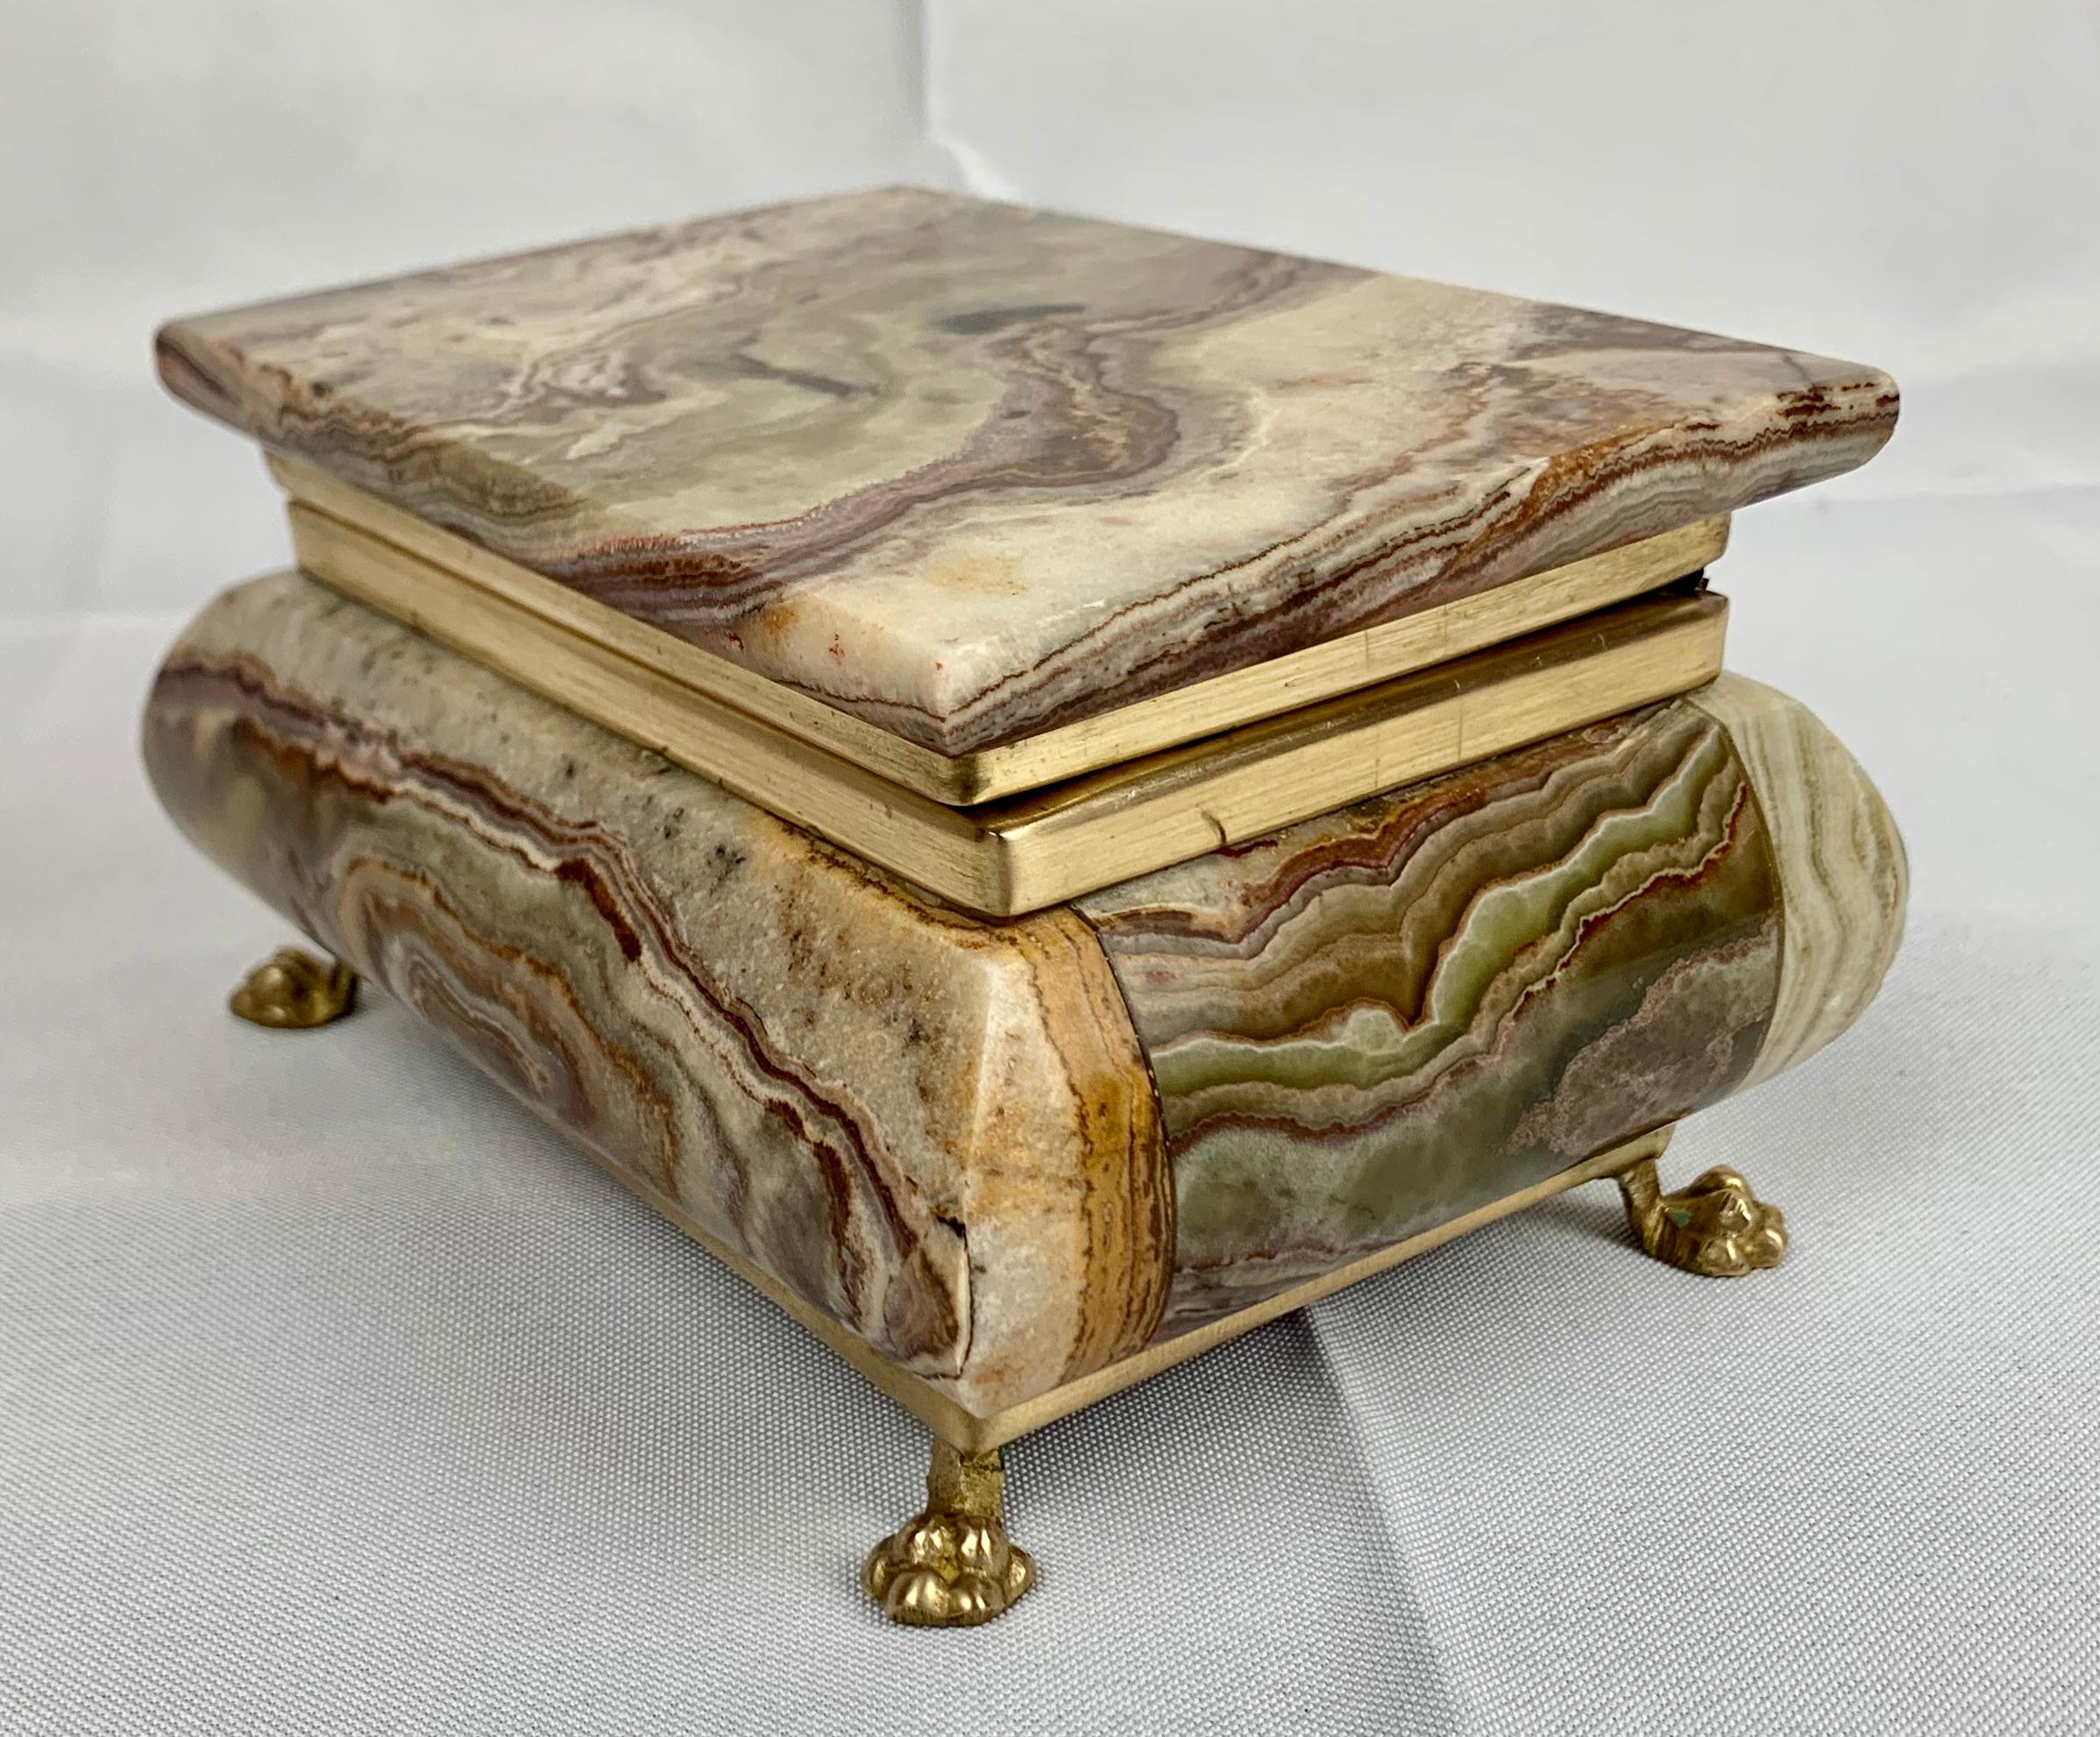 Beautifully marked natural onyx bombé shaped box with lion's paw feet. The hinged frame is brass.
The pieces of stone selected to make this box all have exotic markings. The lining is dark red velvet.
Measures: H-3